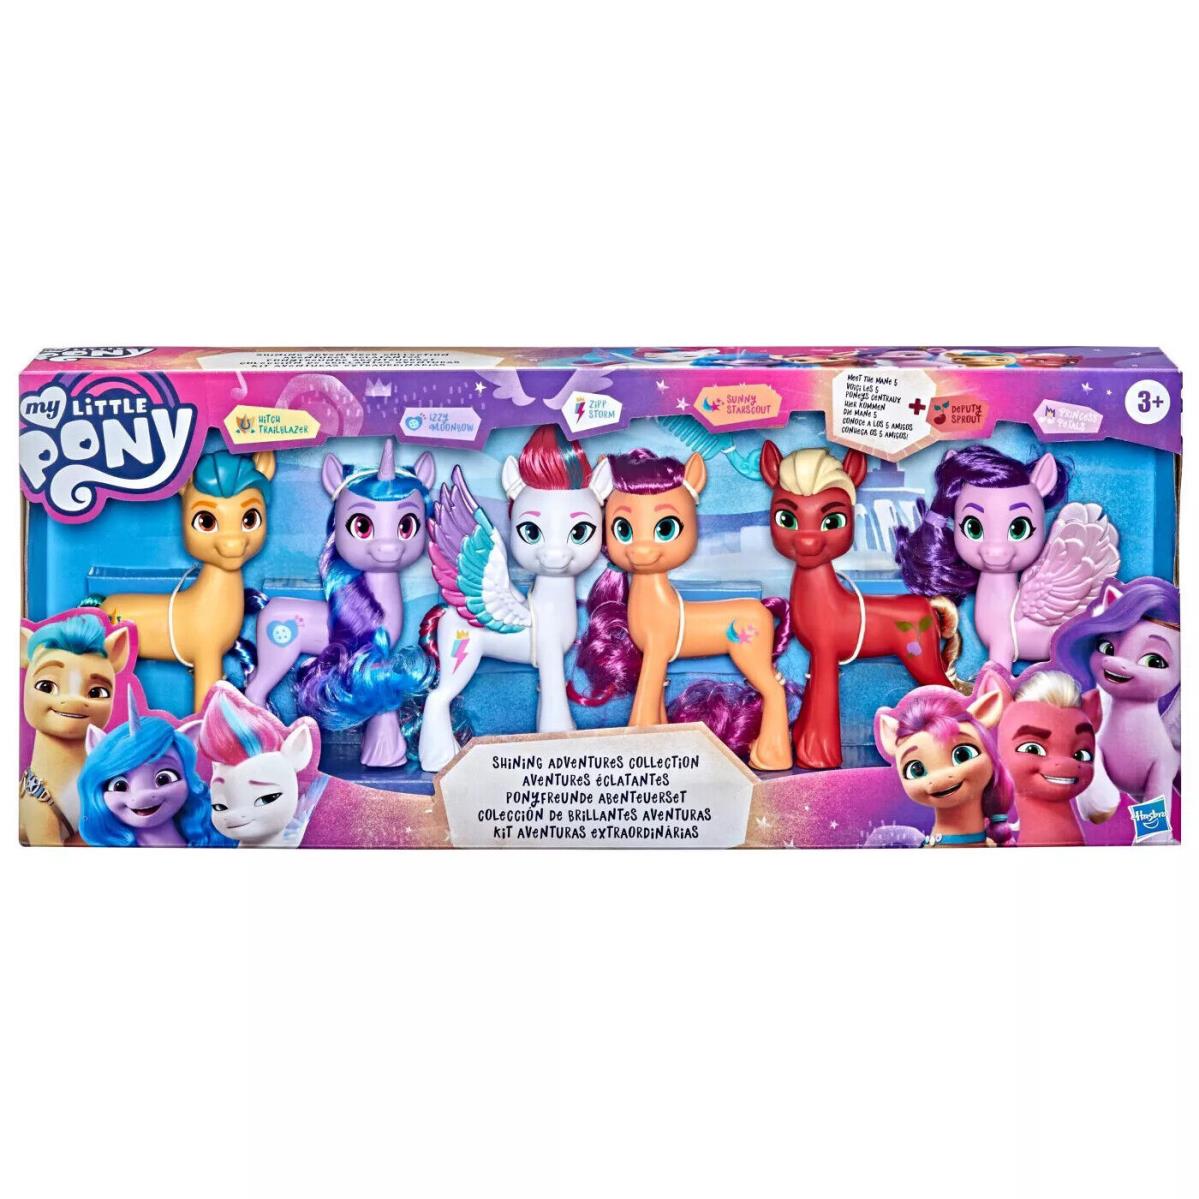 My Little Pony: A Generation Shining Adventures Collection Set 6 Ponies